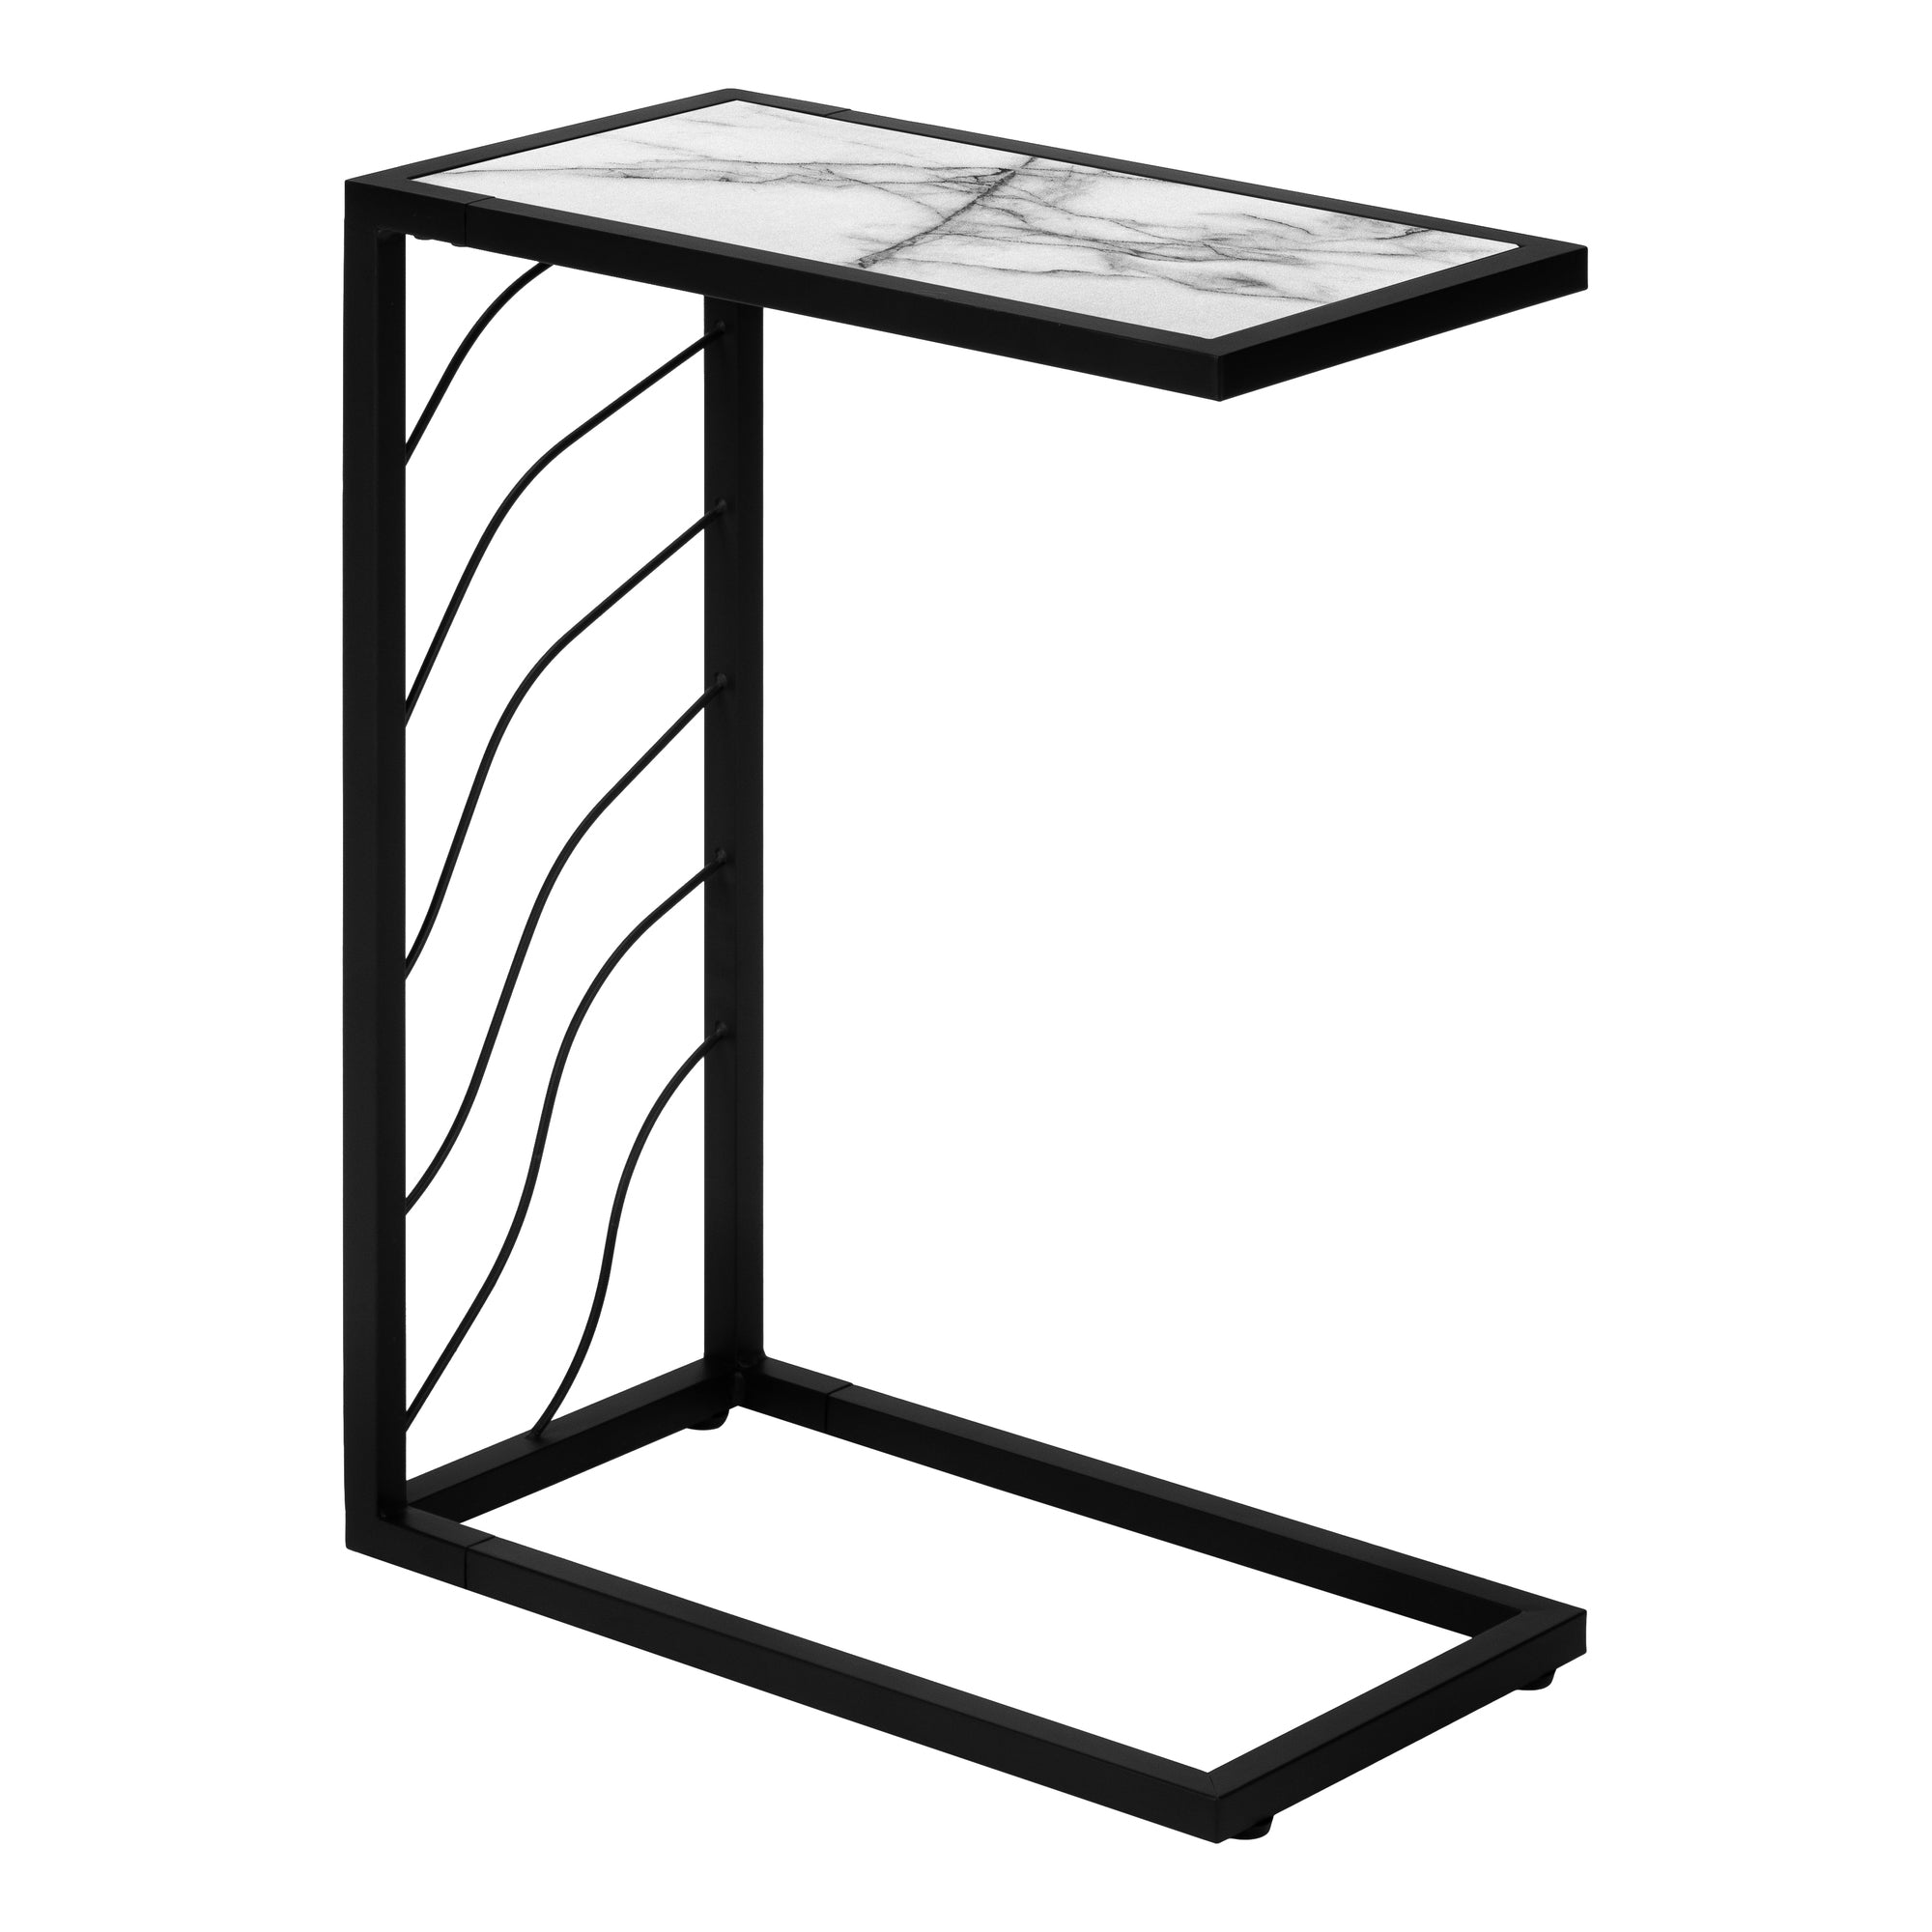 ACCENT TABLE - 25"H / WHITE MARBLE-LOOK / BLACK METAL